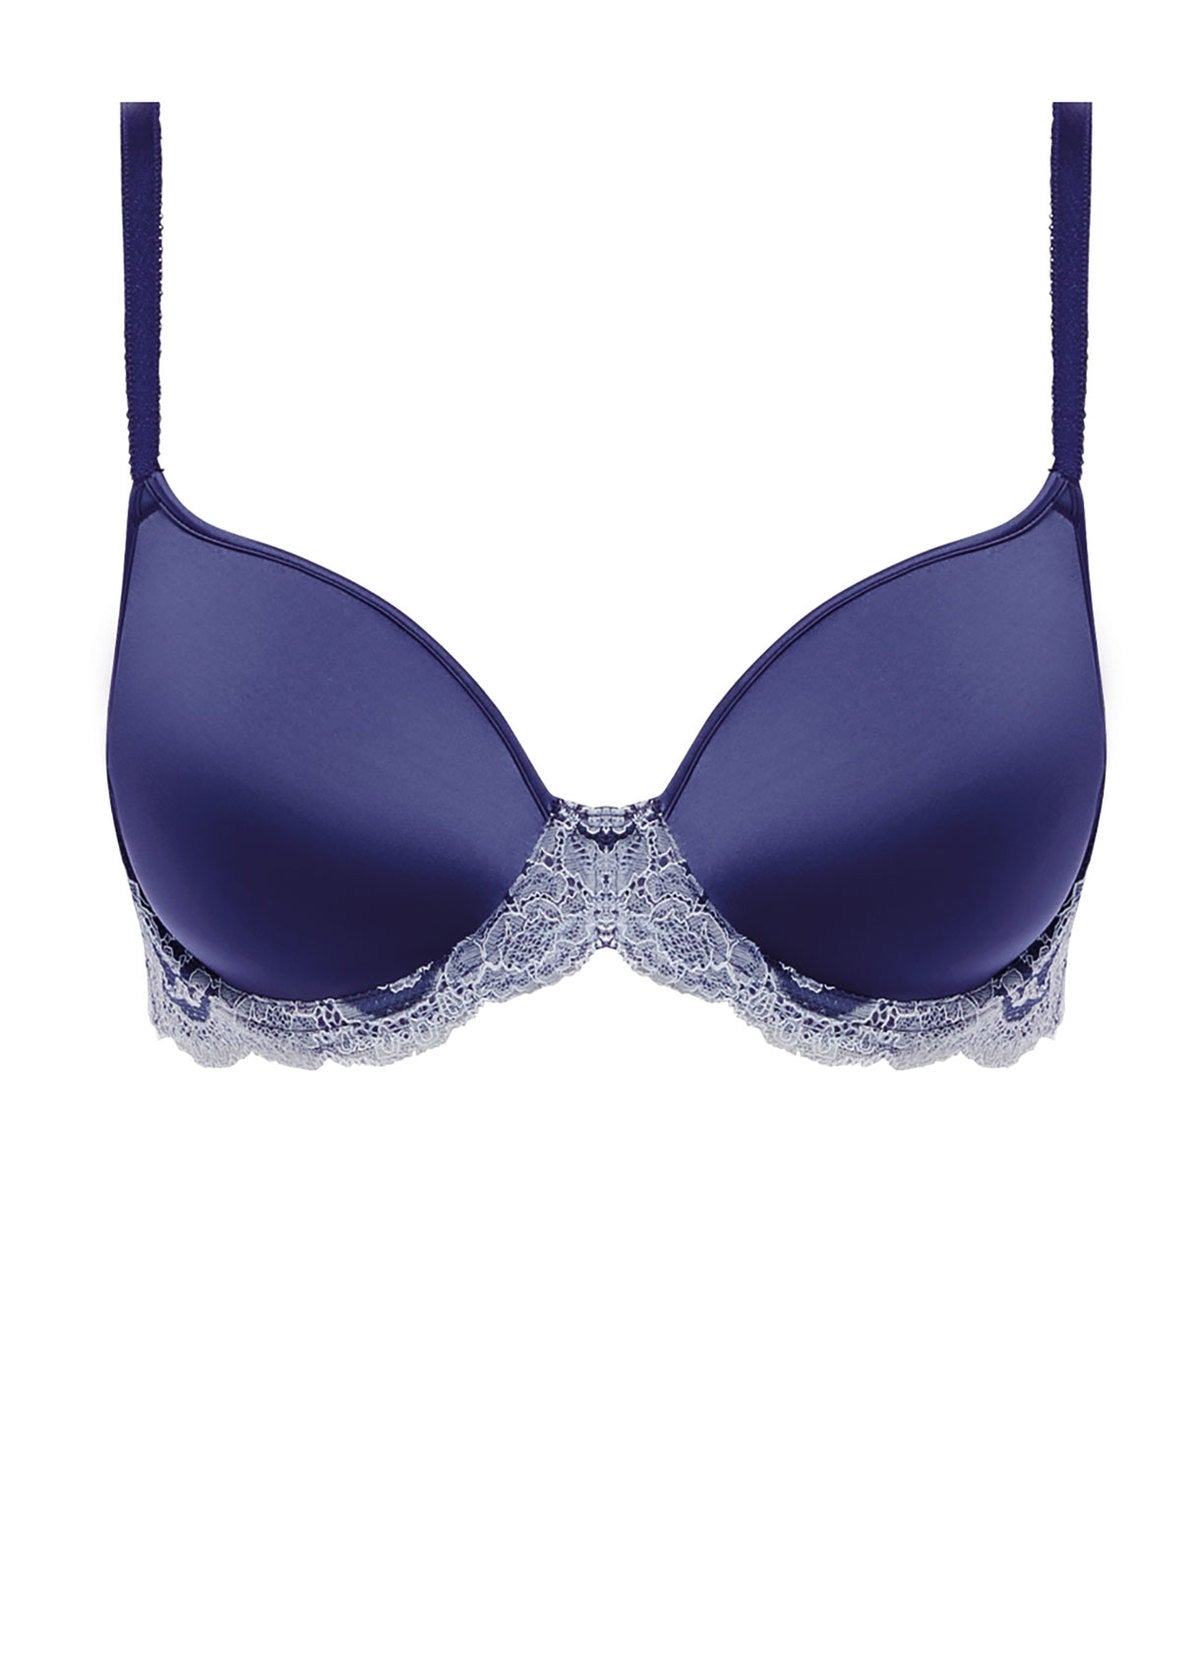 Wacoal B-Smooth Wire Free Bralette - Ombre Blue - An Intimate Affaire